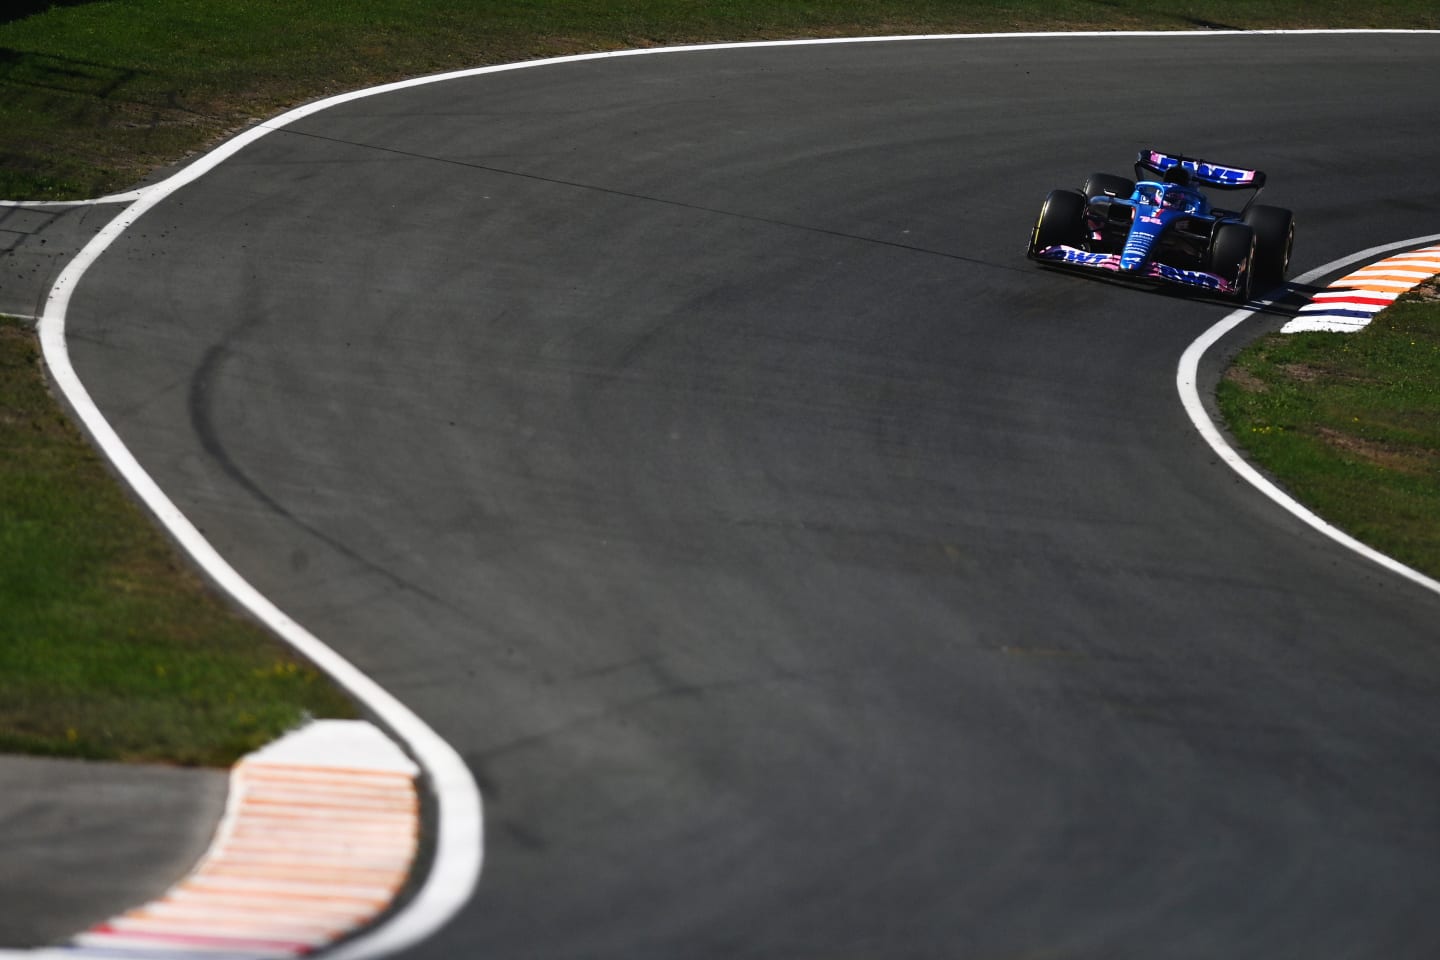 ZANDVOORT, NETHERLANDS - SEPTEMBER 03: Fernando Alonso of Spain driving the (14) Alpine F1 A522 Renault on track during final practice ahead of the F1 Grand Prix of The Netherlands at Circuit Zandvoort on September 03, 2022 in Zandvoort, Netherlands. (Photo by Dan Mullan/Getty Images)